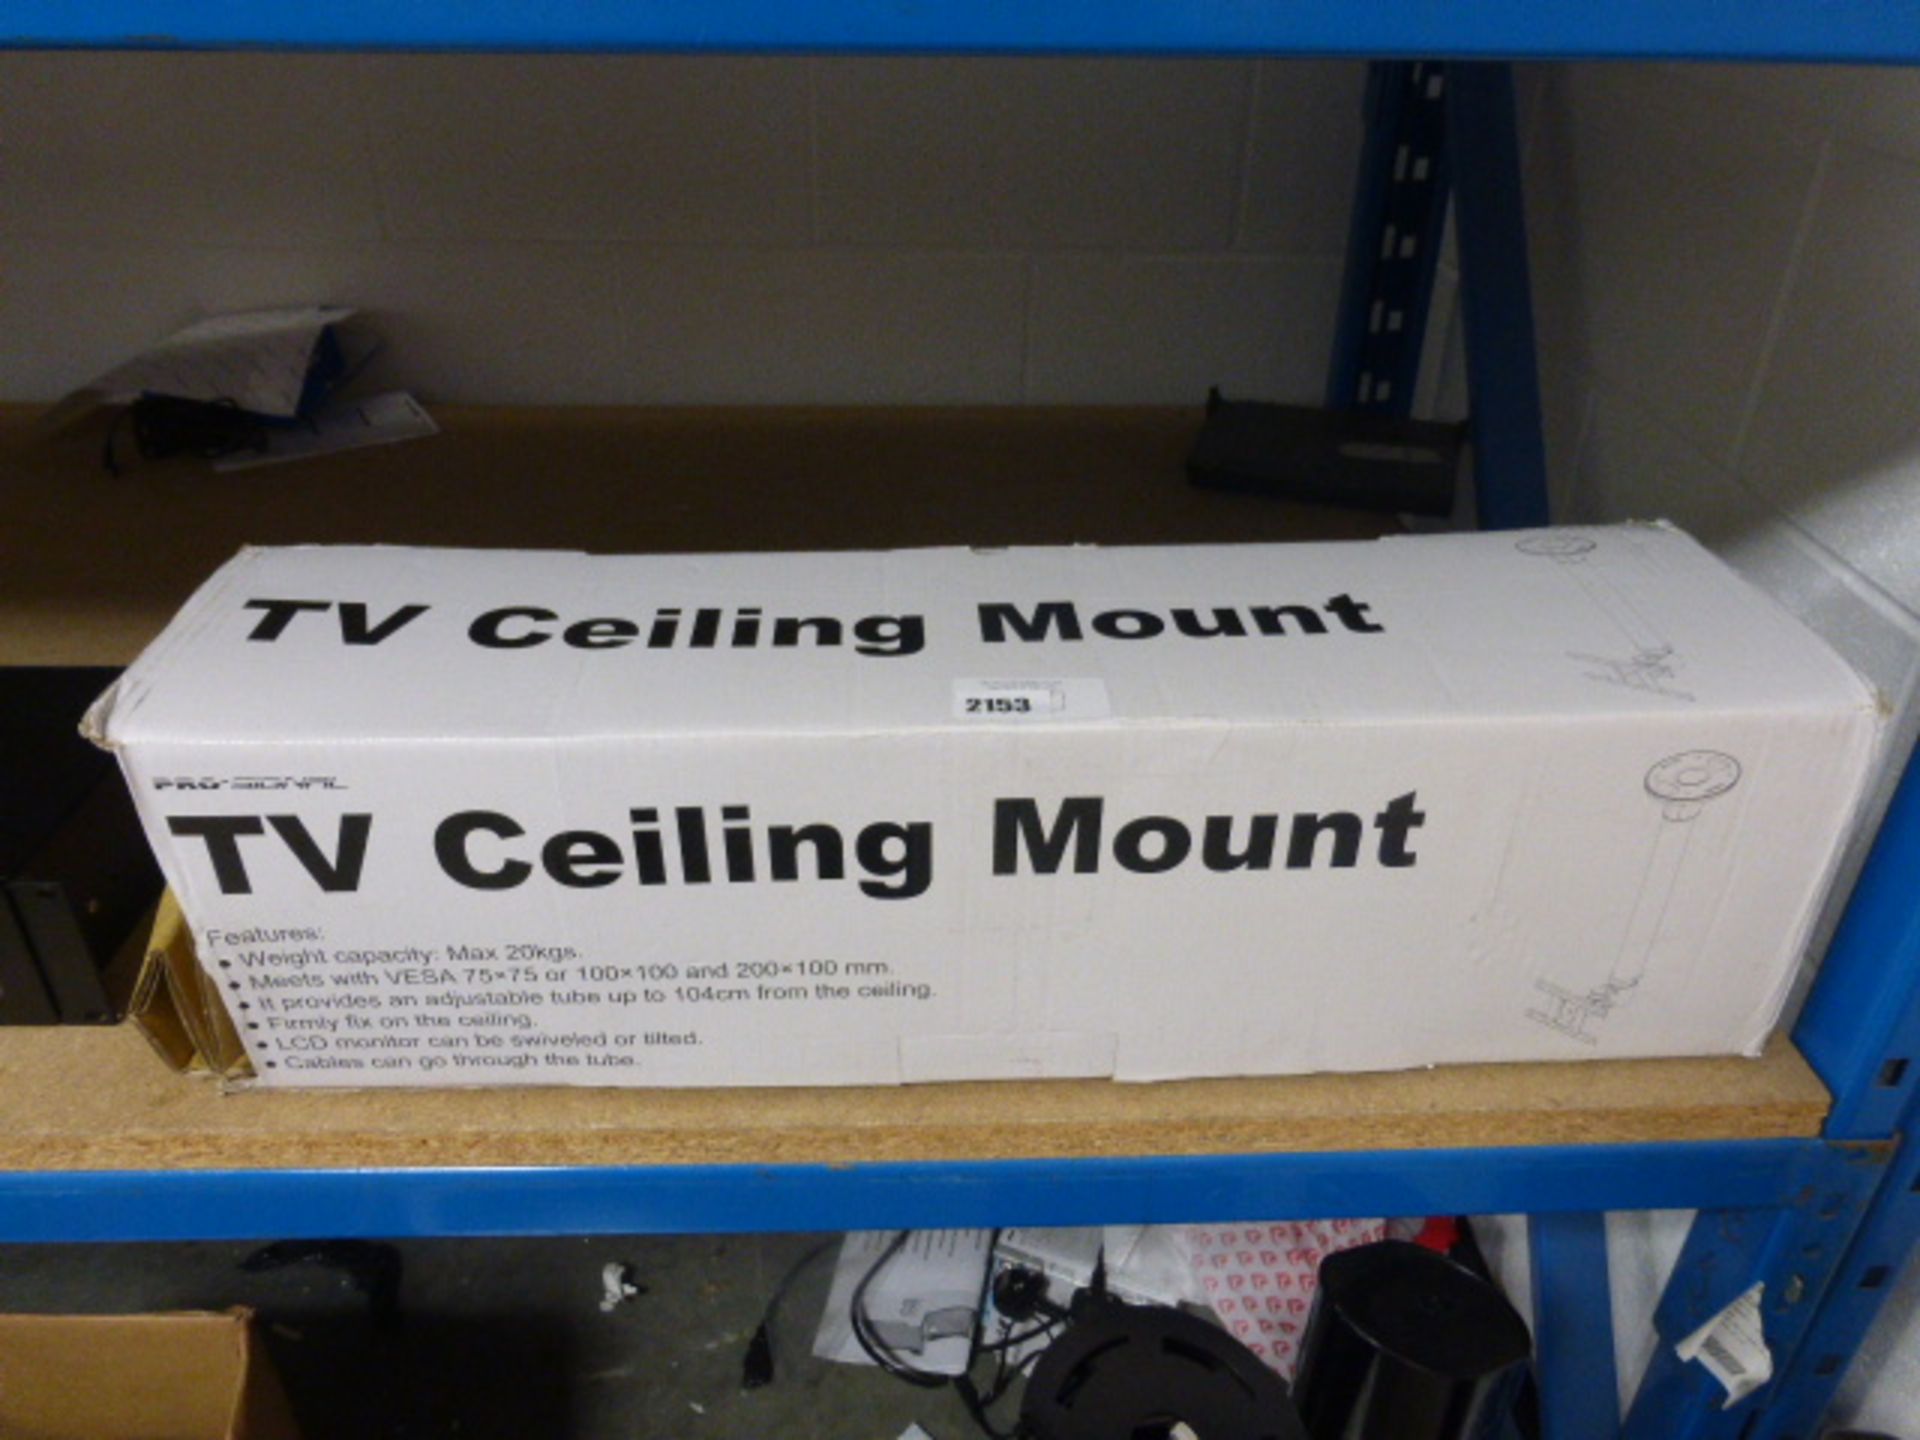 TV ceiling mount, possibly incomplete, used item